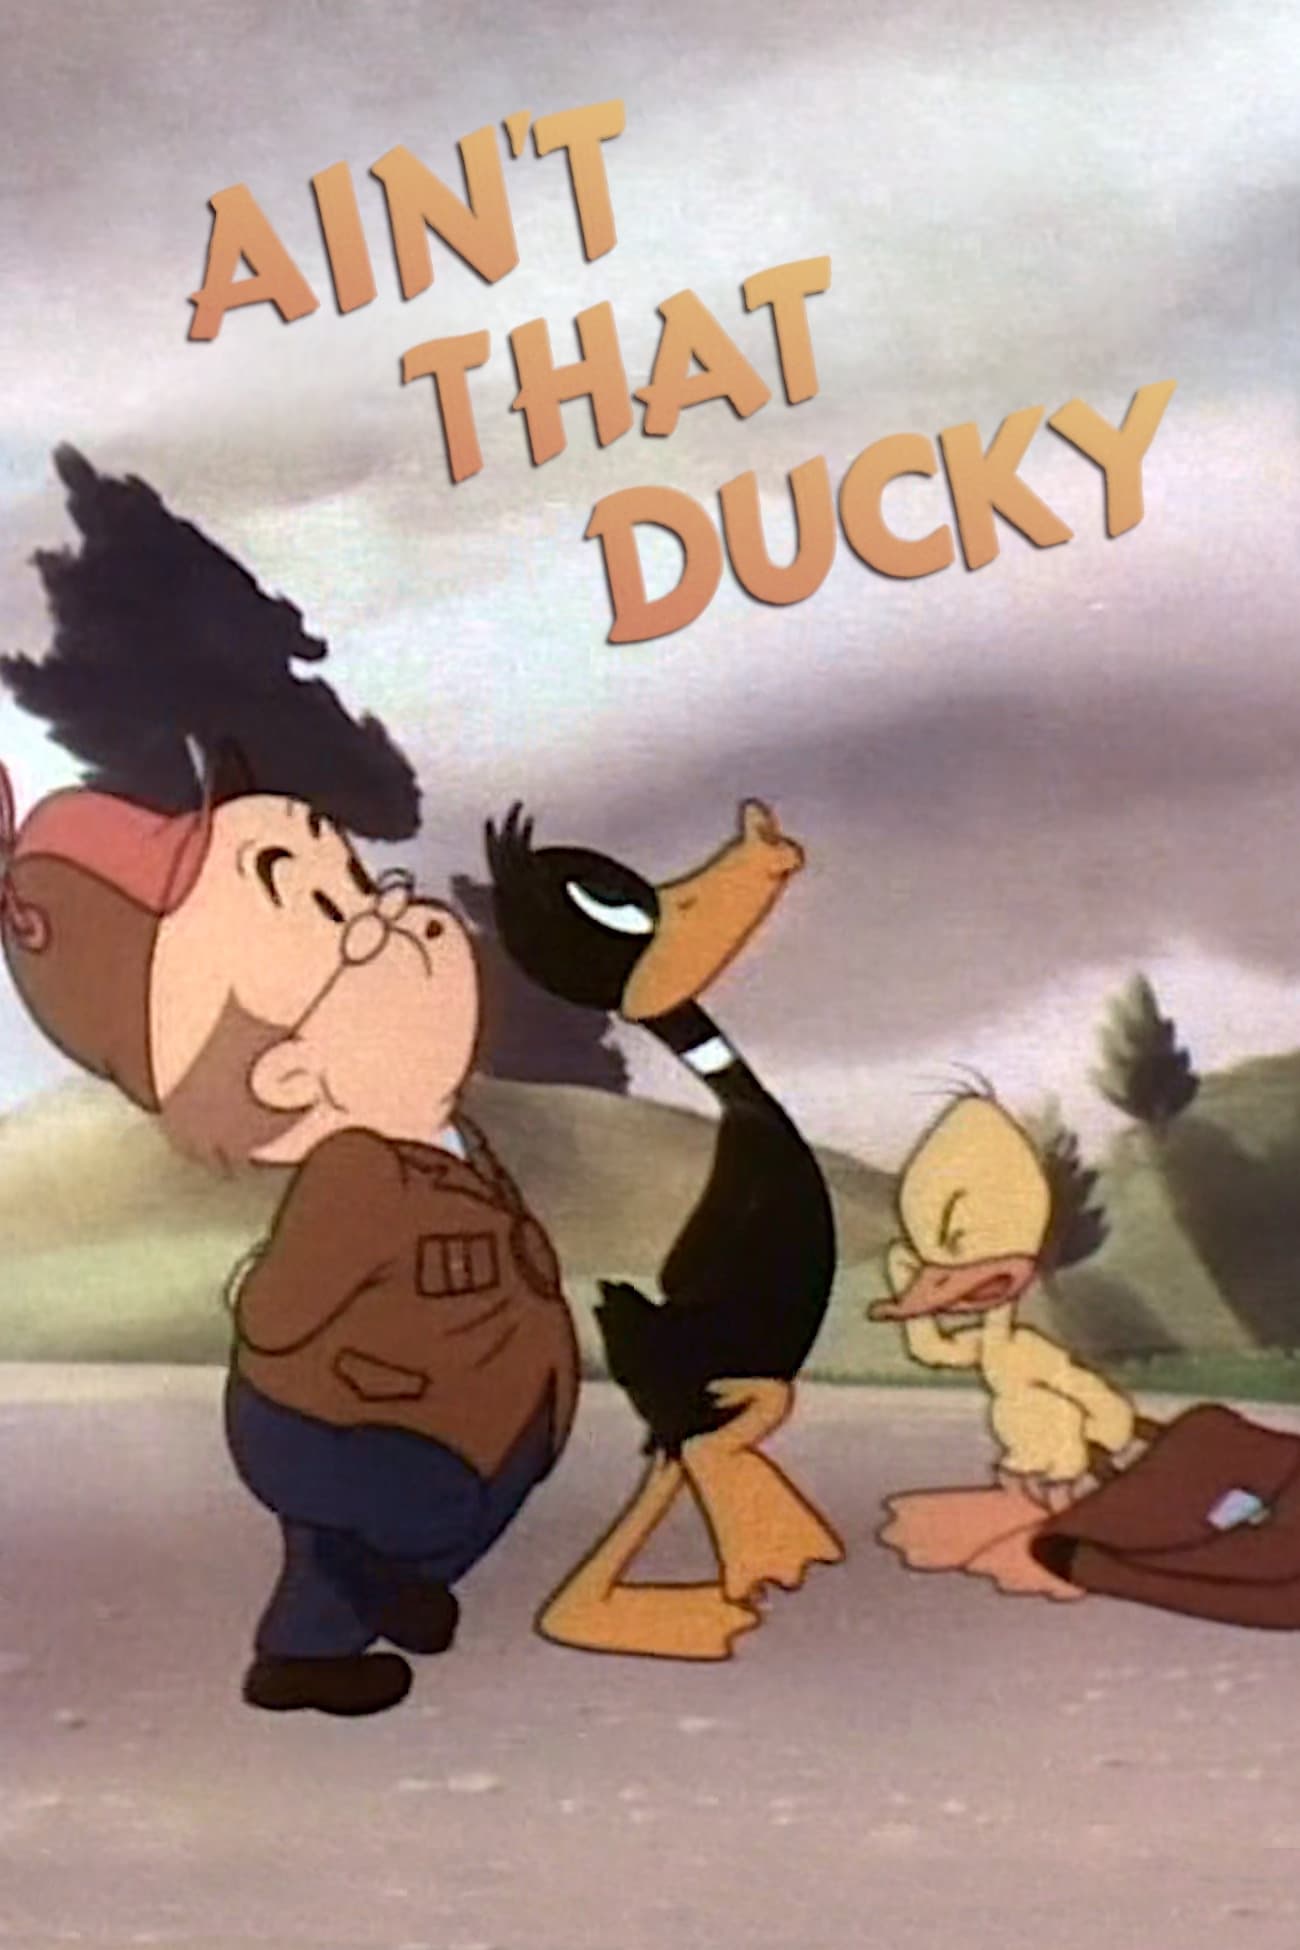 Ain't That Ducky (1945)